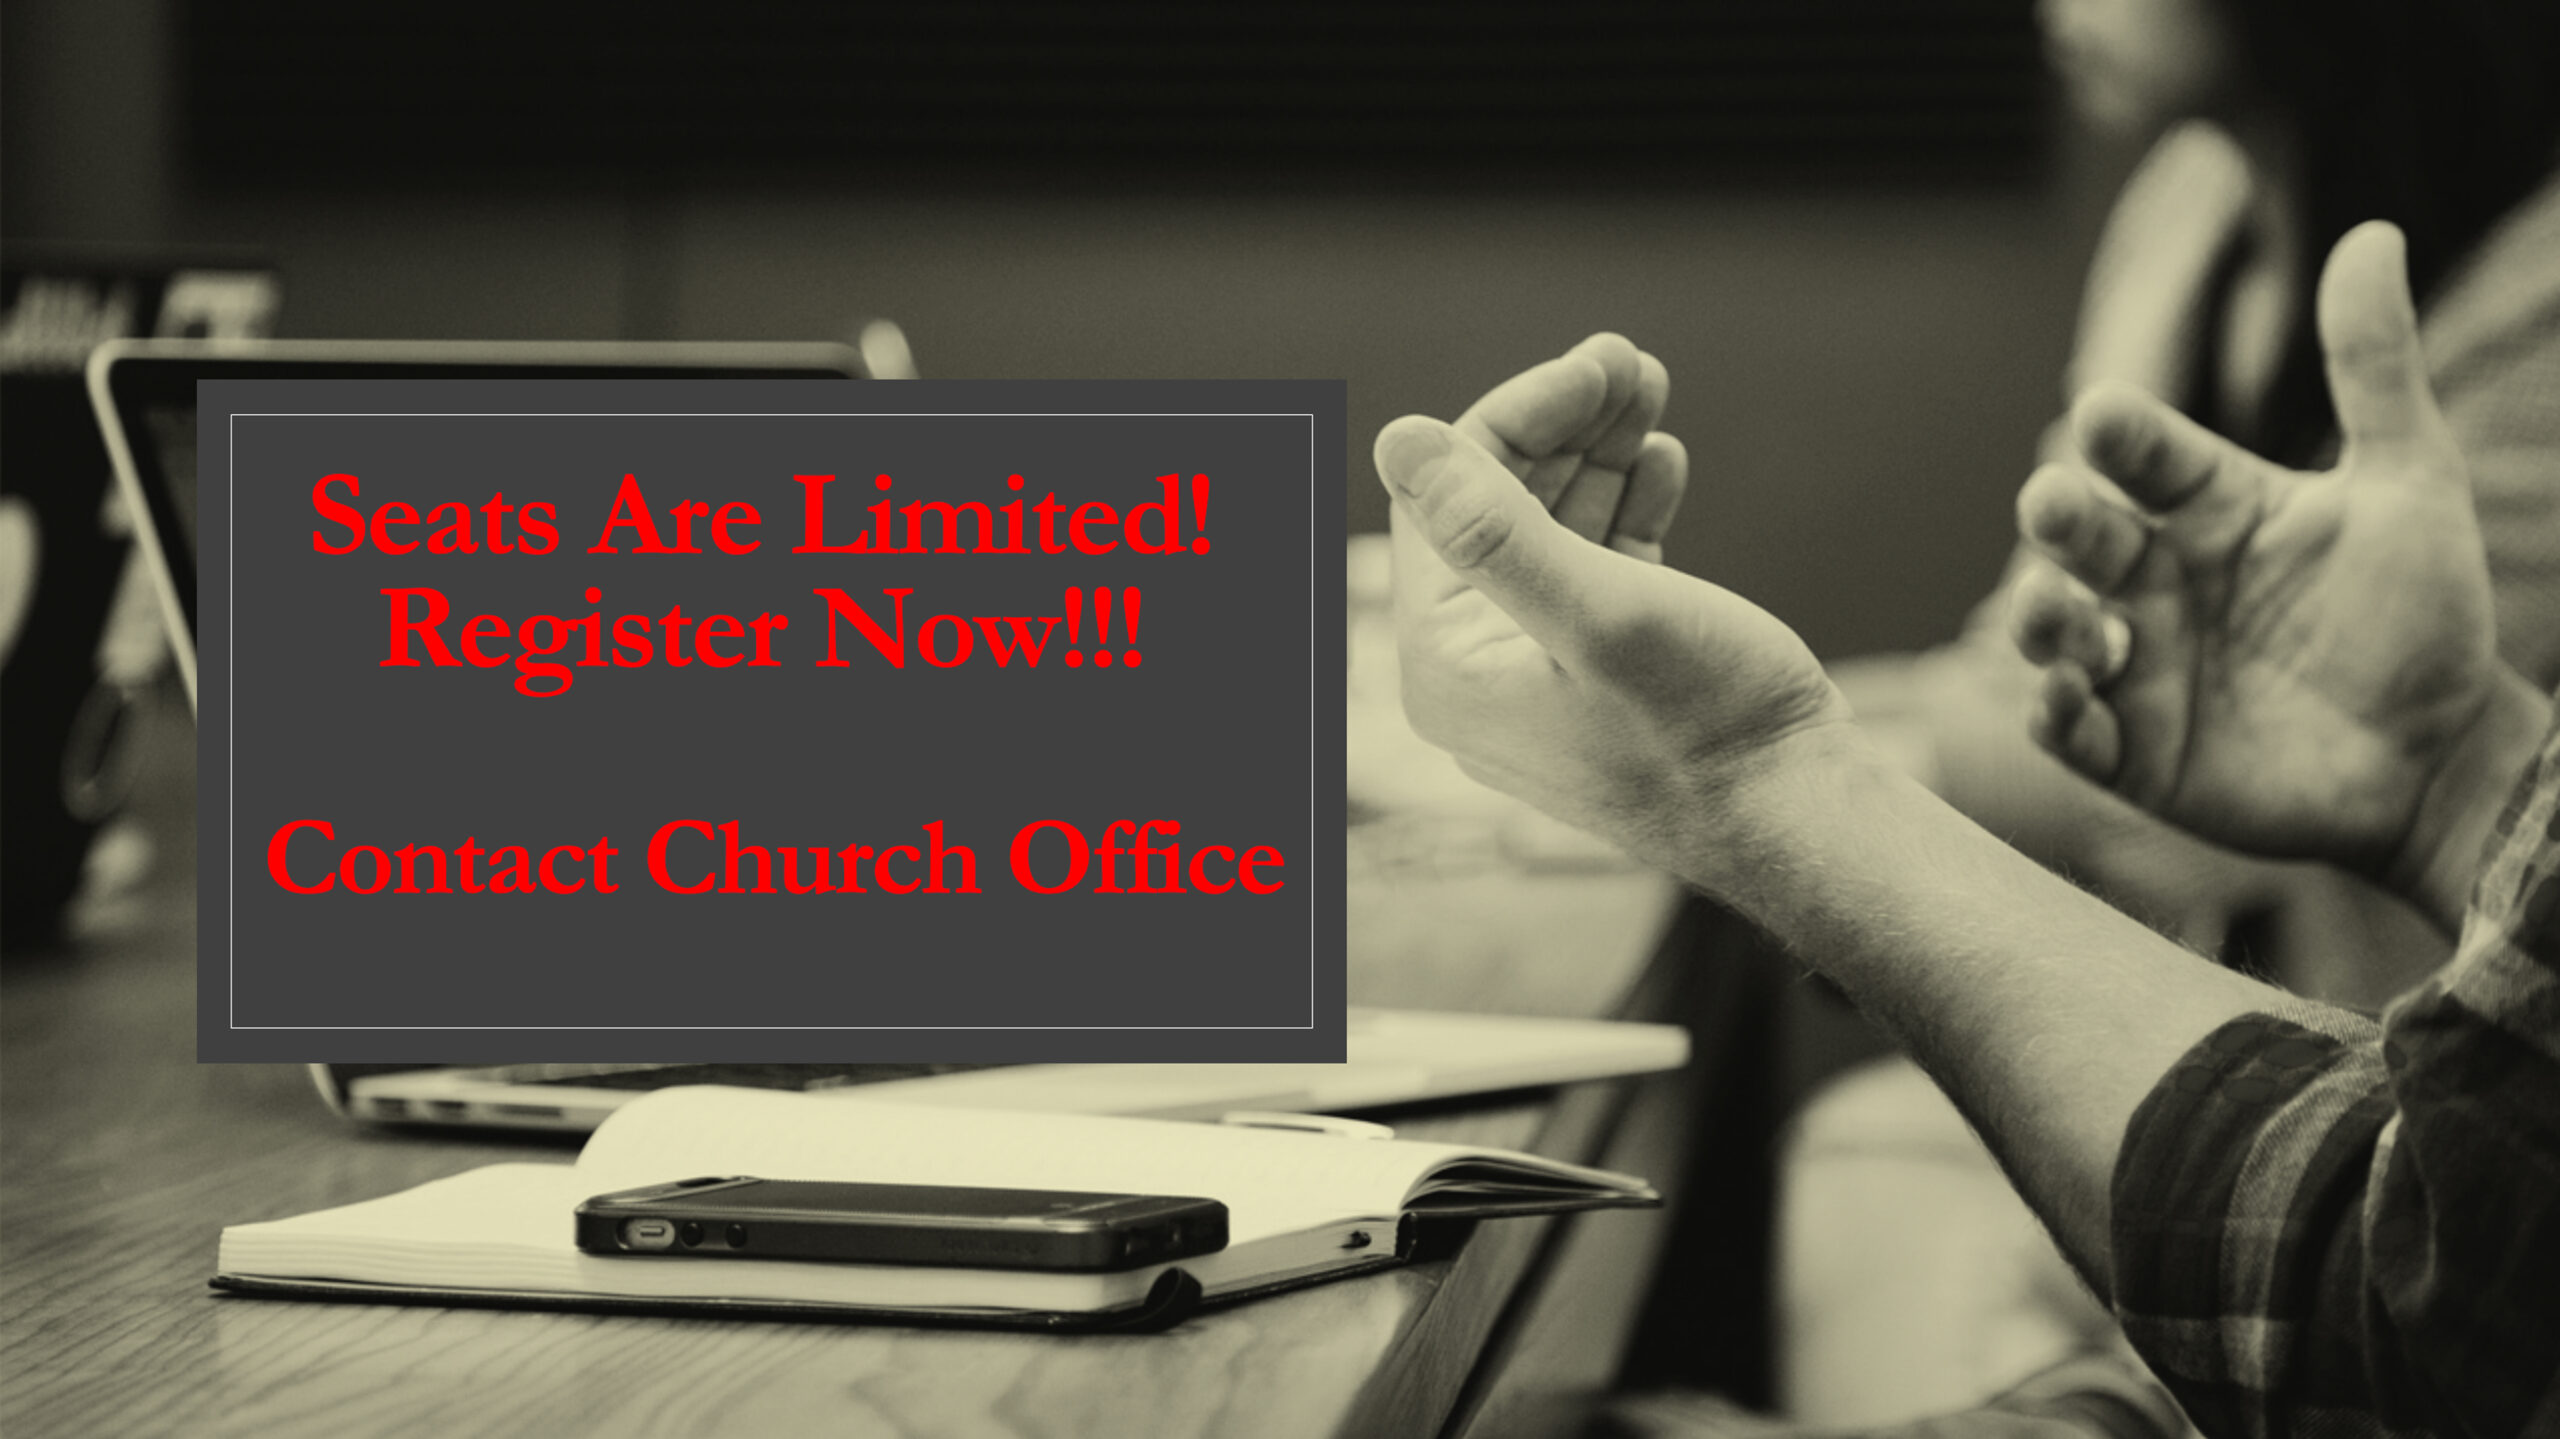 Red text on background showing a persons hands in discussion and books on a desk. the text saysSeats Are Limited! Register Now!!!   Contact Church Office